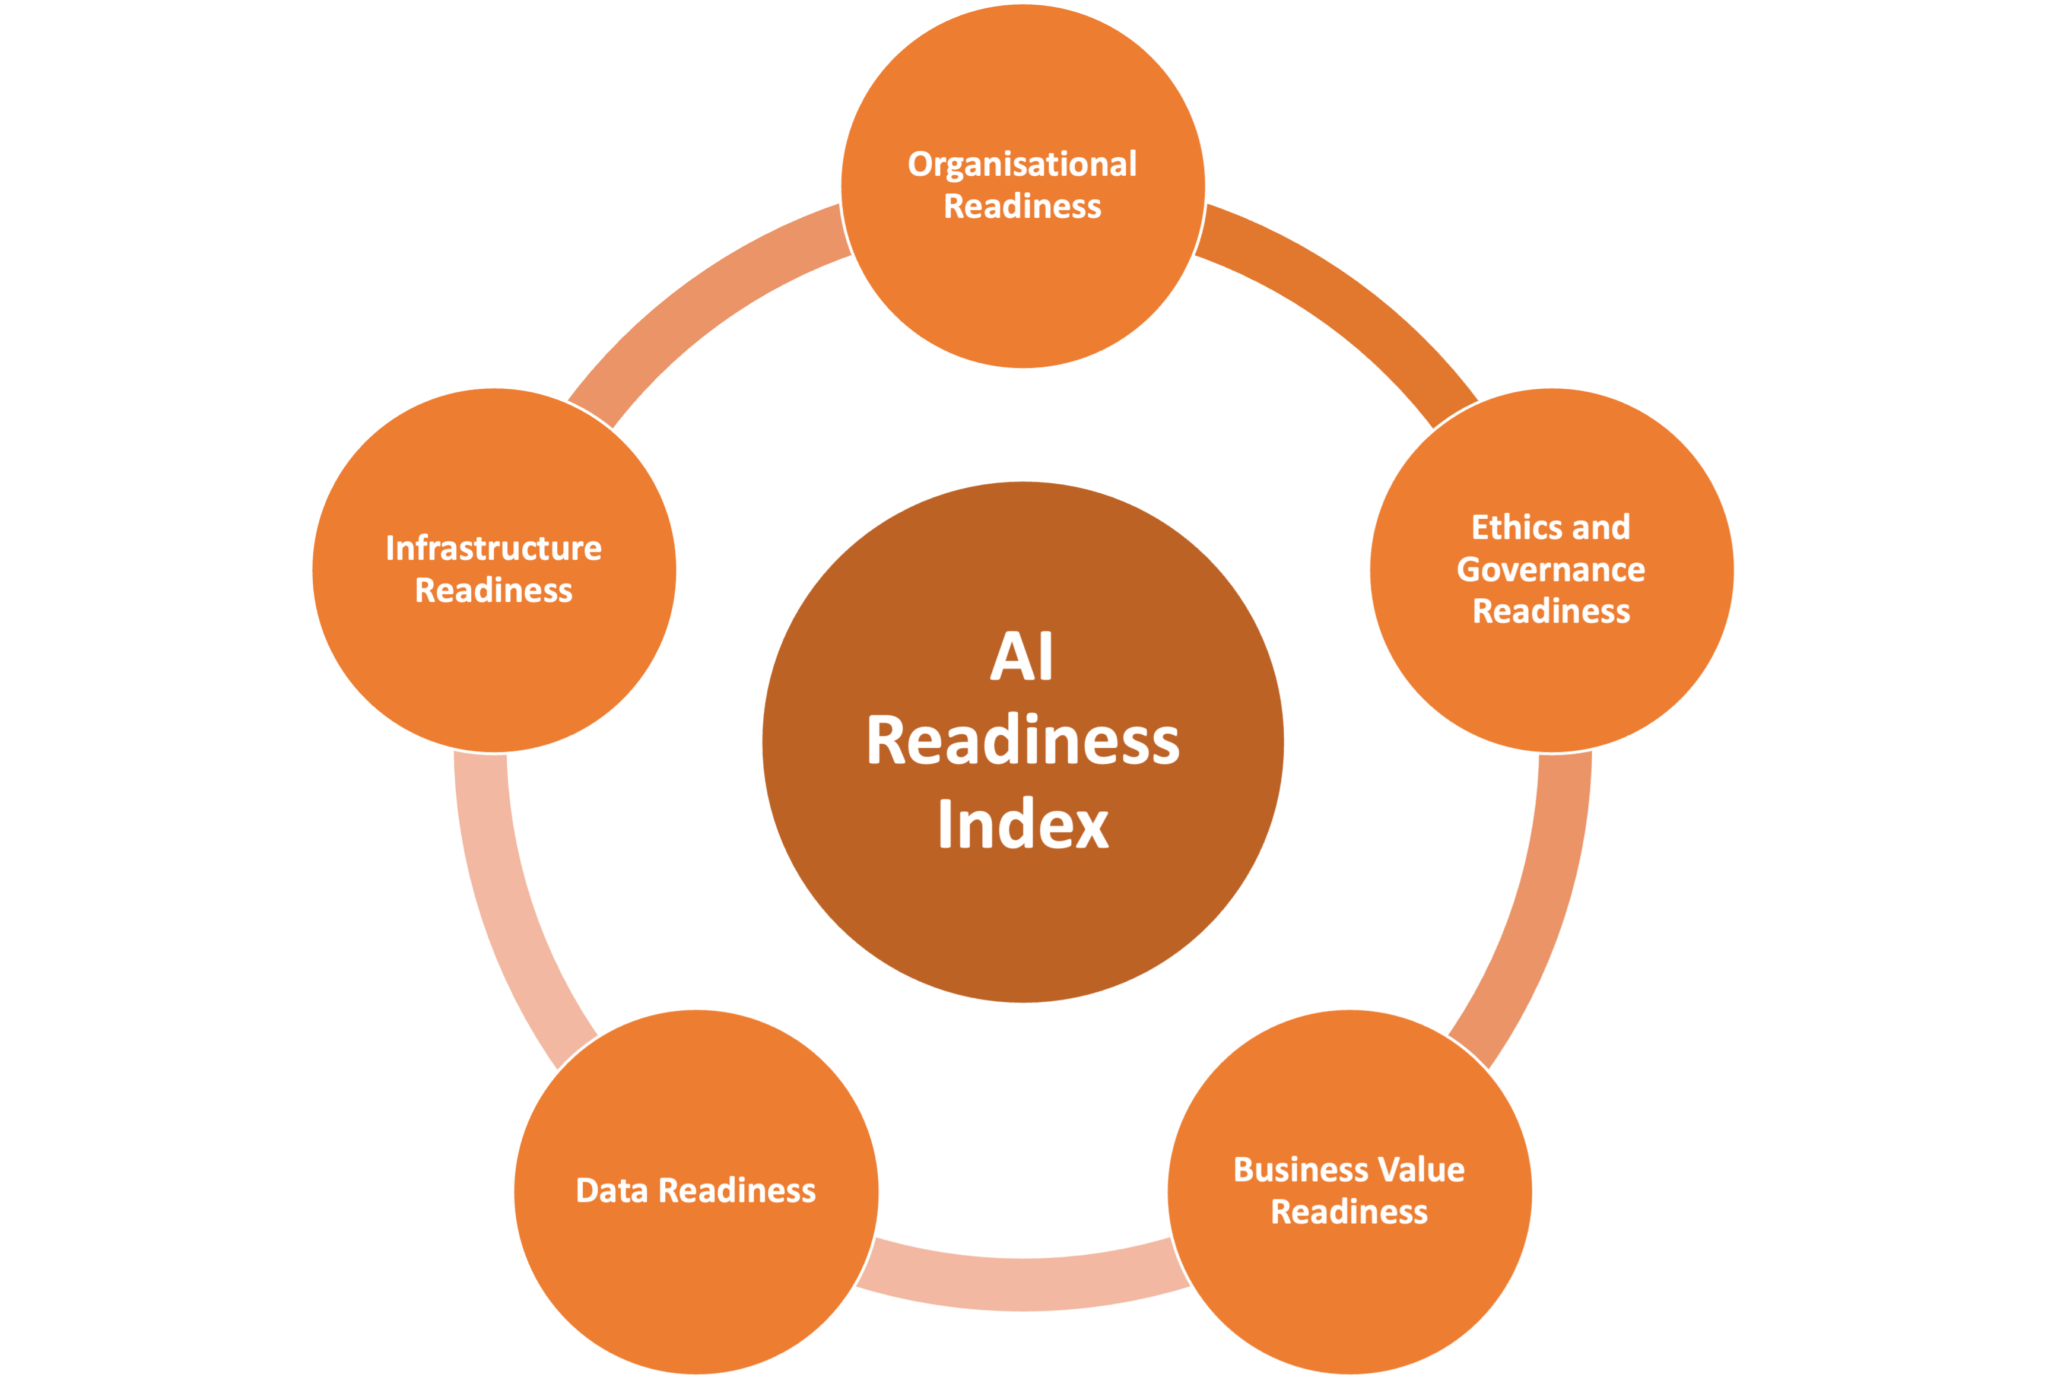 AI Readiness Index measures multiple dimensions